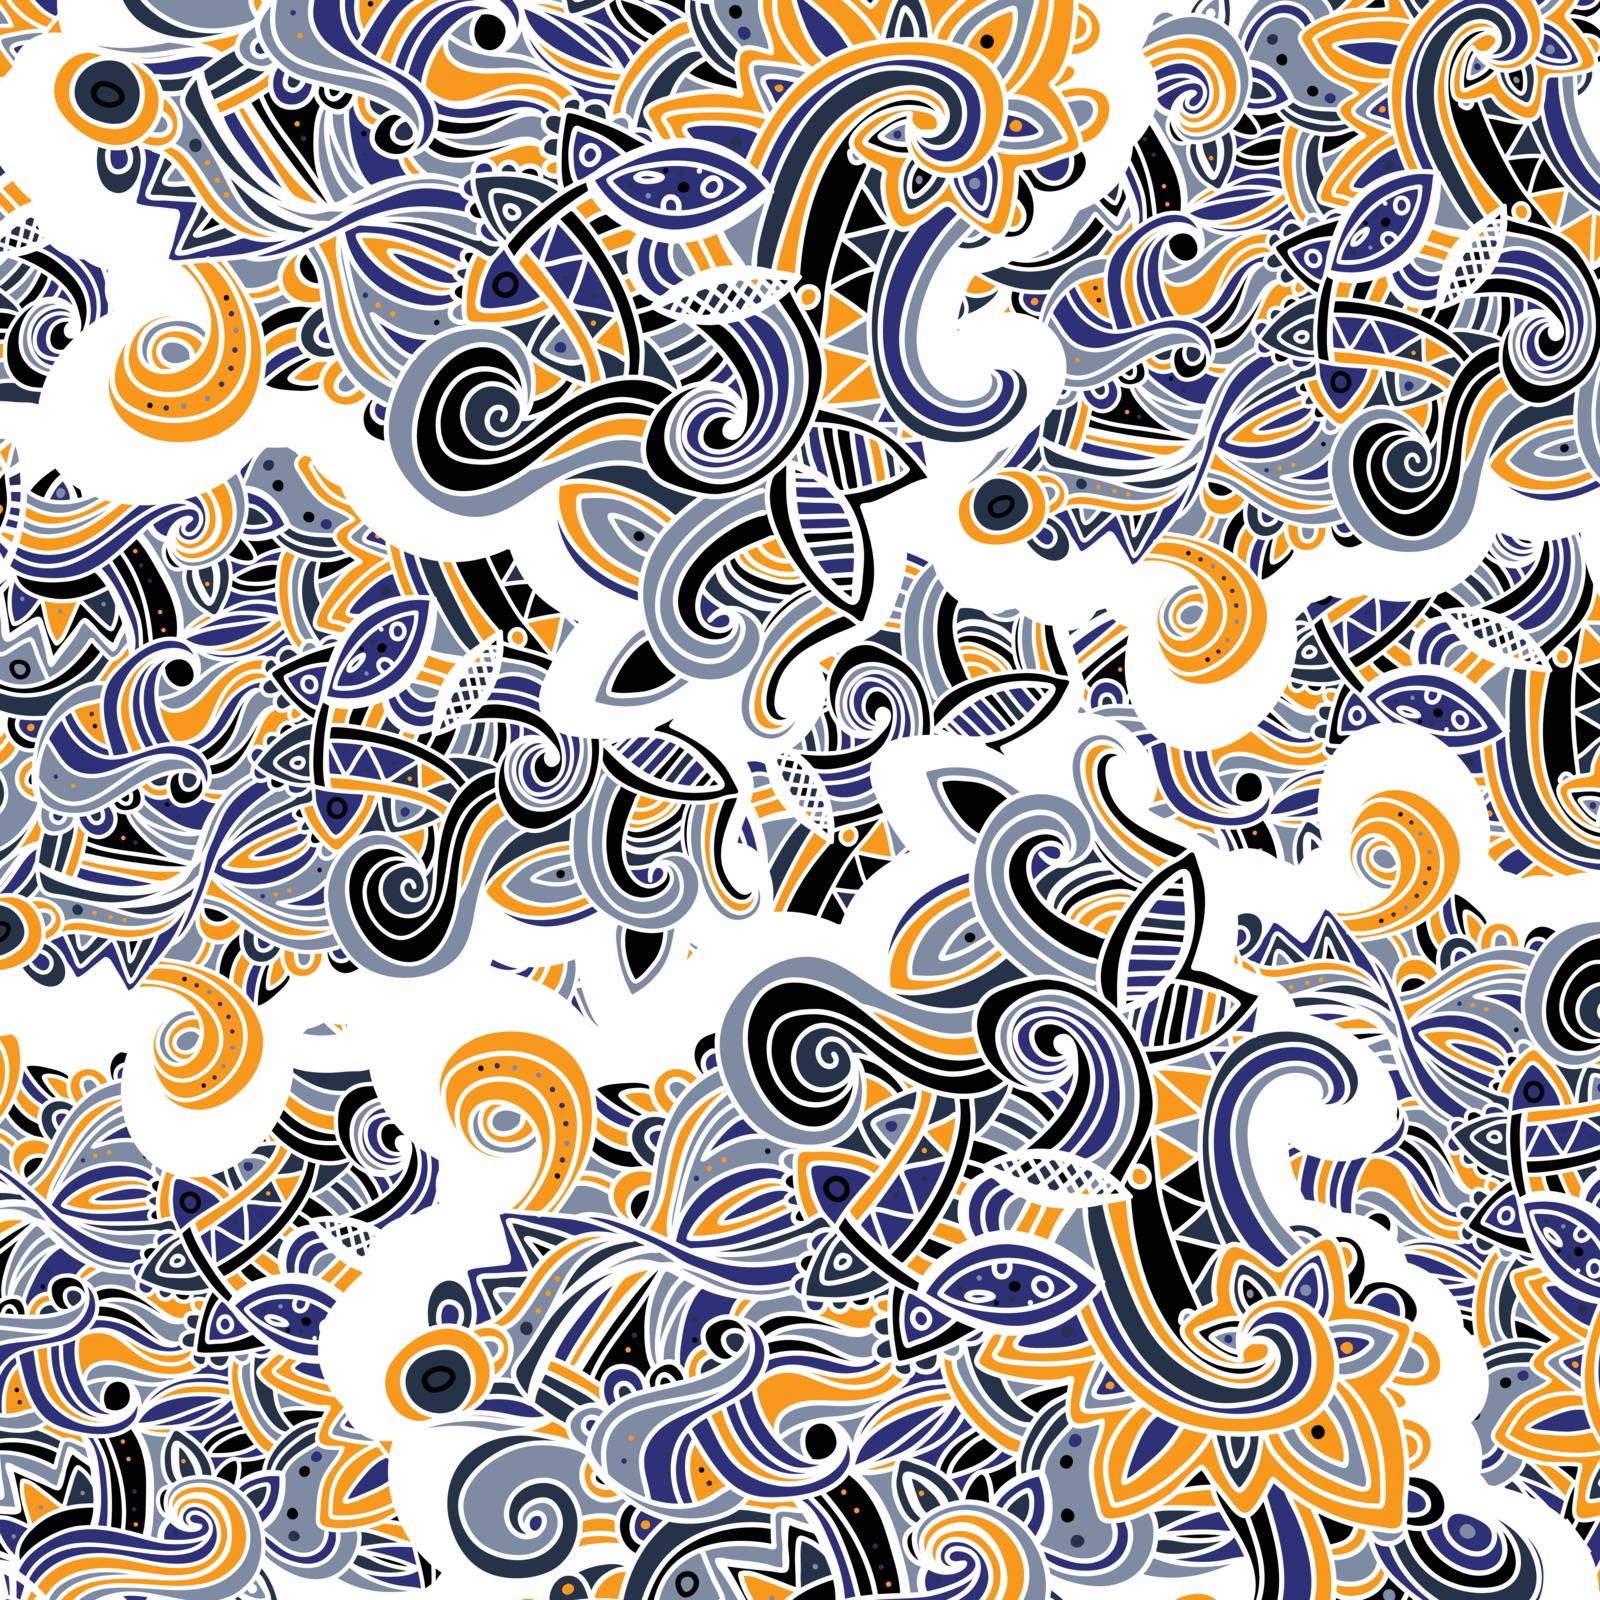 Multicolor Pattern Doodles- Decorative Sketchy Notebook Design- Hand-Drawn Vector Illustration Background. by AlisaRed